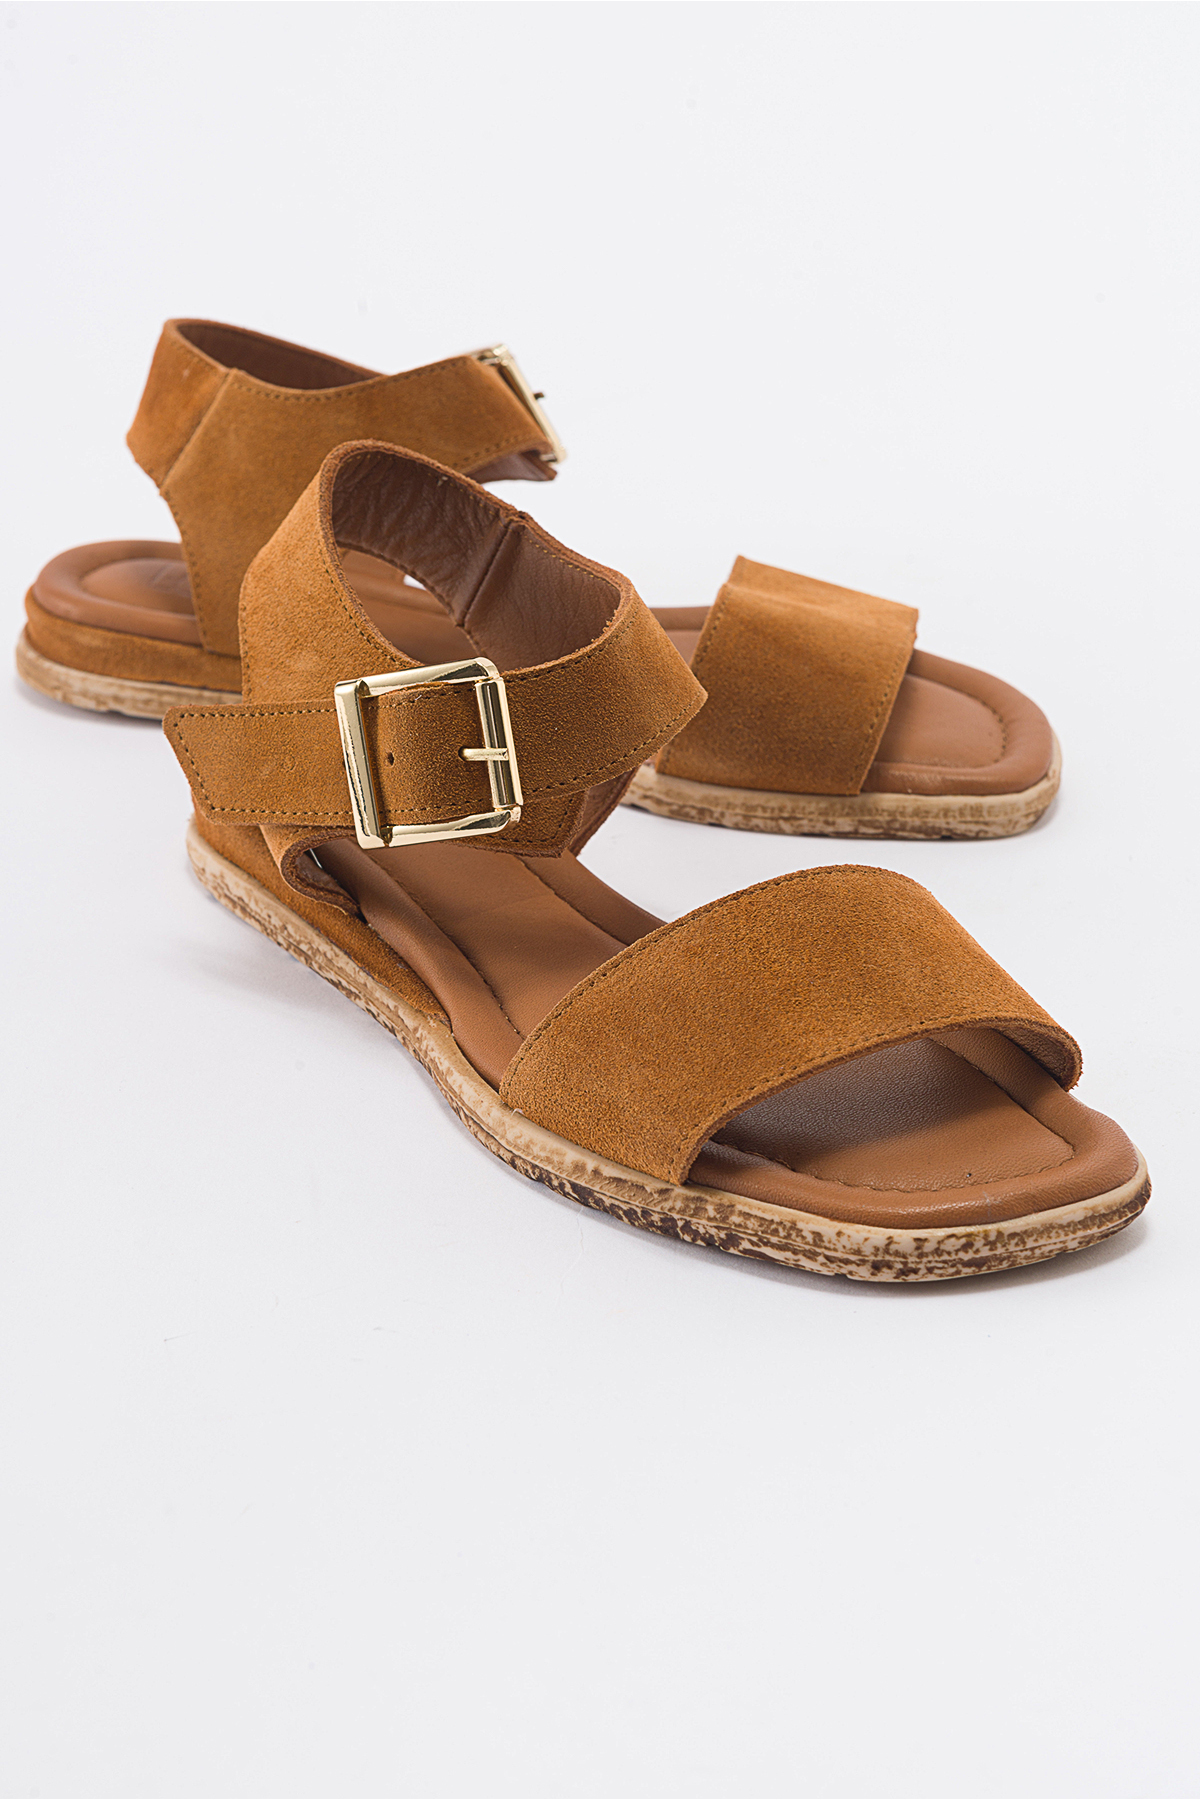 LuviShoes 713 Women's Genuine Leather Tan Suede Sandals